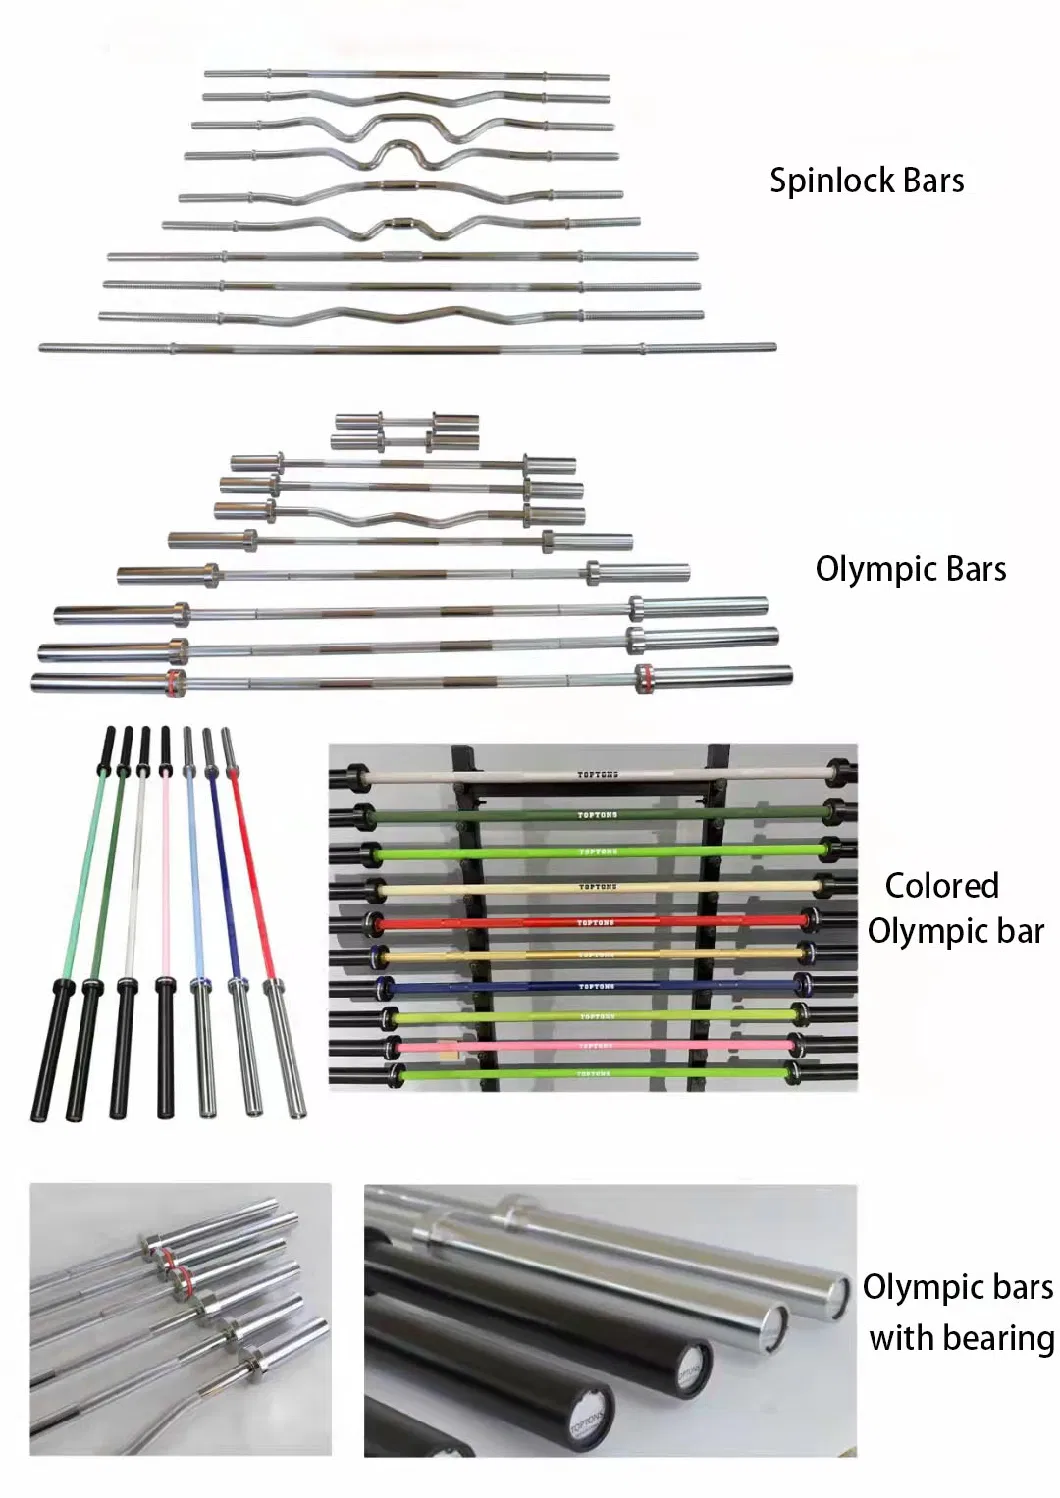 1.2m W/Bend Chrome Curved Barbell Bars- Weight Lifting Strength Training Home Gym Equipment Bars